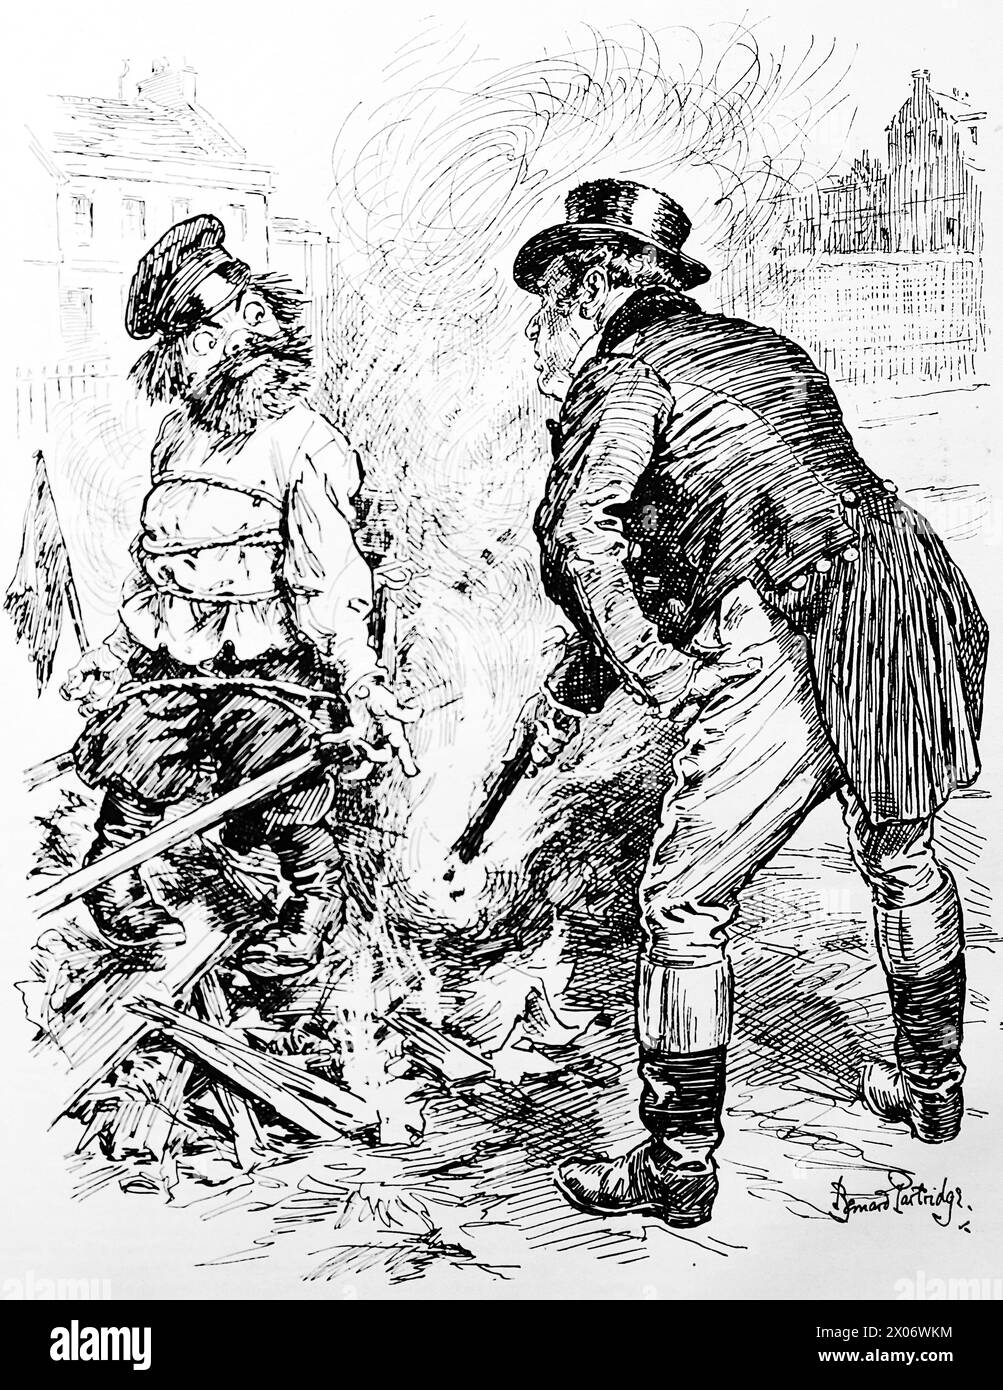 John Bull “Remembers, Remembers” by Bernard Partridge, 5 November 1924, showing businessman John Bull setting light to another character. Photograph from a line drawing originally printed in the Punch and London Charivari periodical in 1924. This is a good example of the skilful artists and the humour and satire of the time. Stock Photo